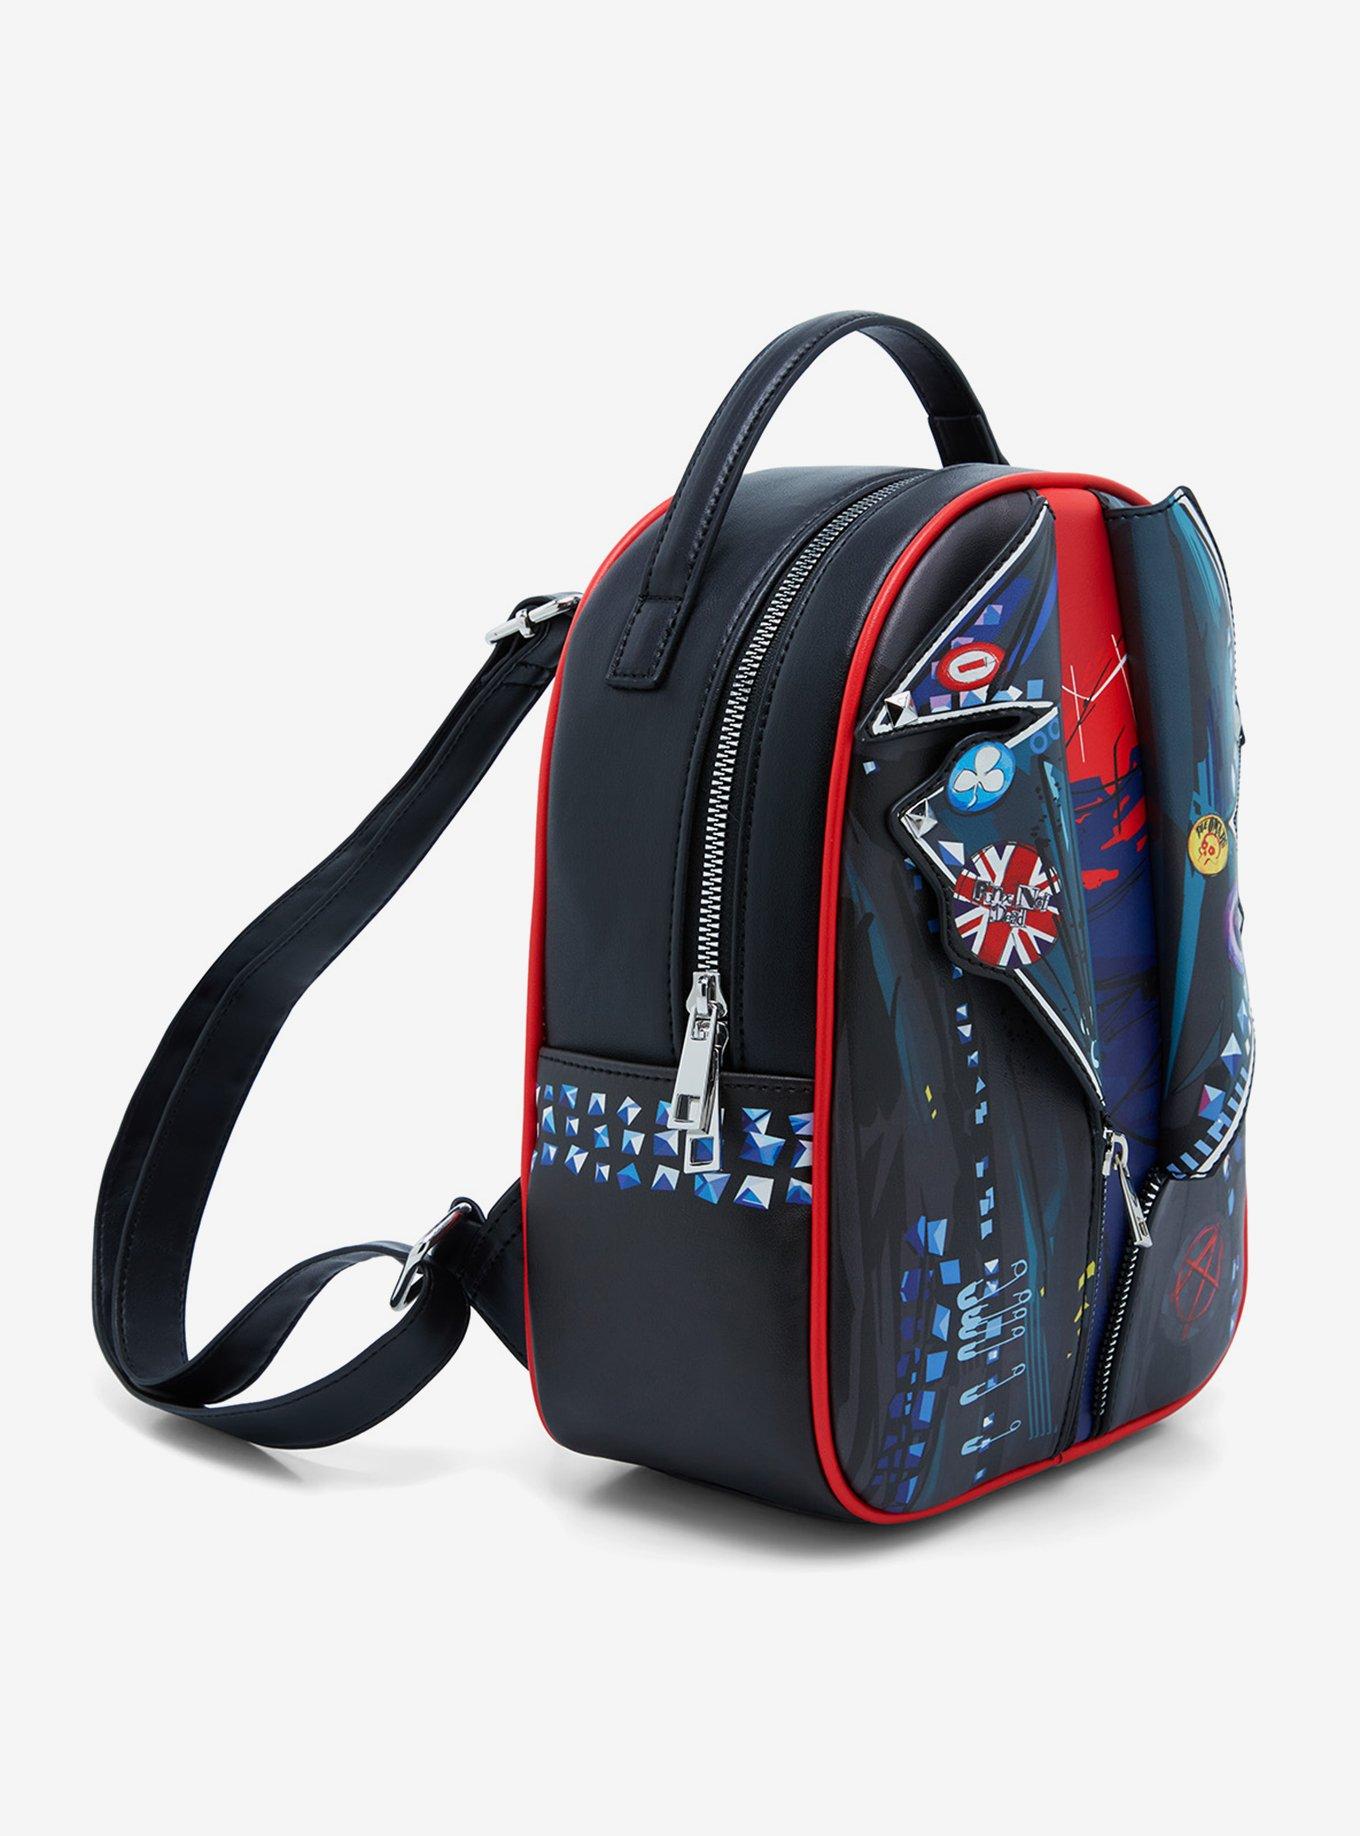 Hot Topic Marvel Spider-Man Pull Tab Backpack, spiders tab 